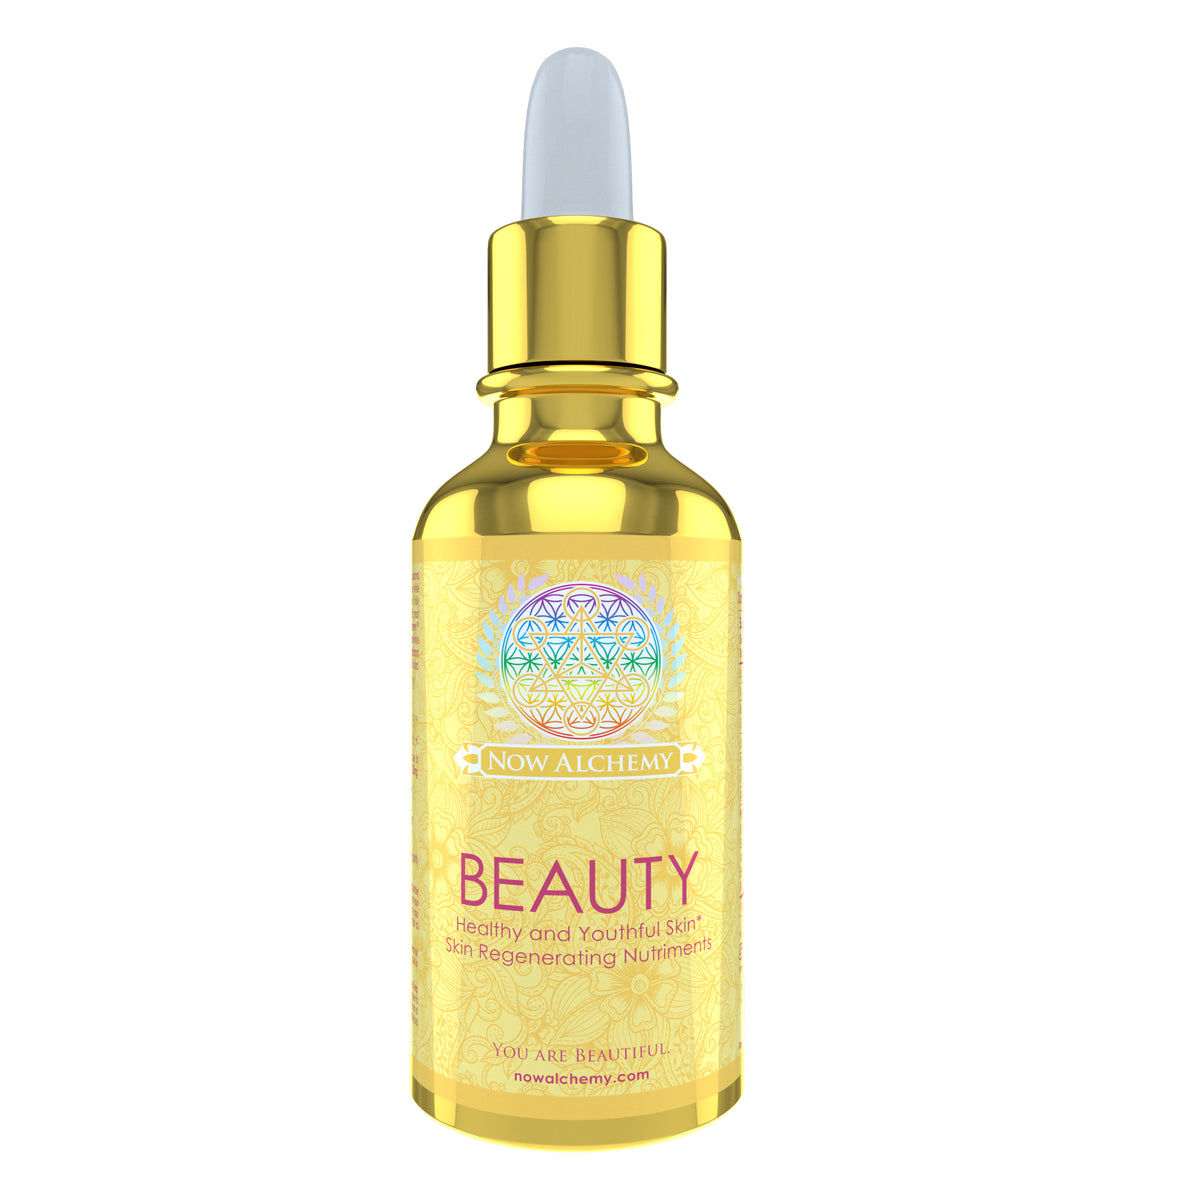 Beauty (50ml) | Now Alchemy | Raw Living UK | Now Alchemy Beauty is designed for healthy &amp; youthful skin. Contains Lycopene, Mucopolysaccharide, CoQ10, Camu Camu &amp; Acerola Cherry.